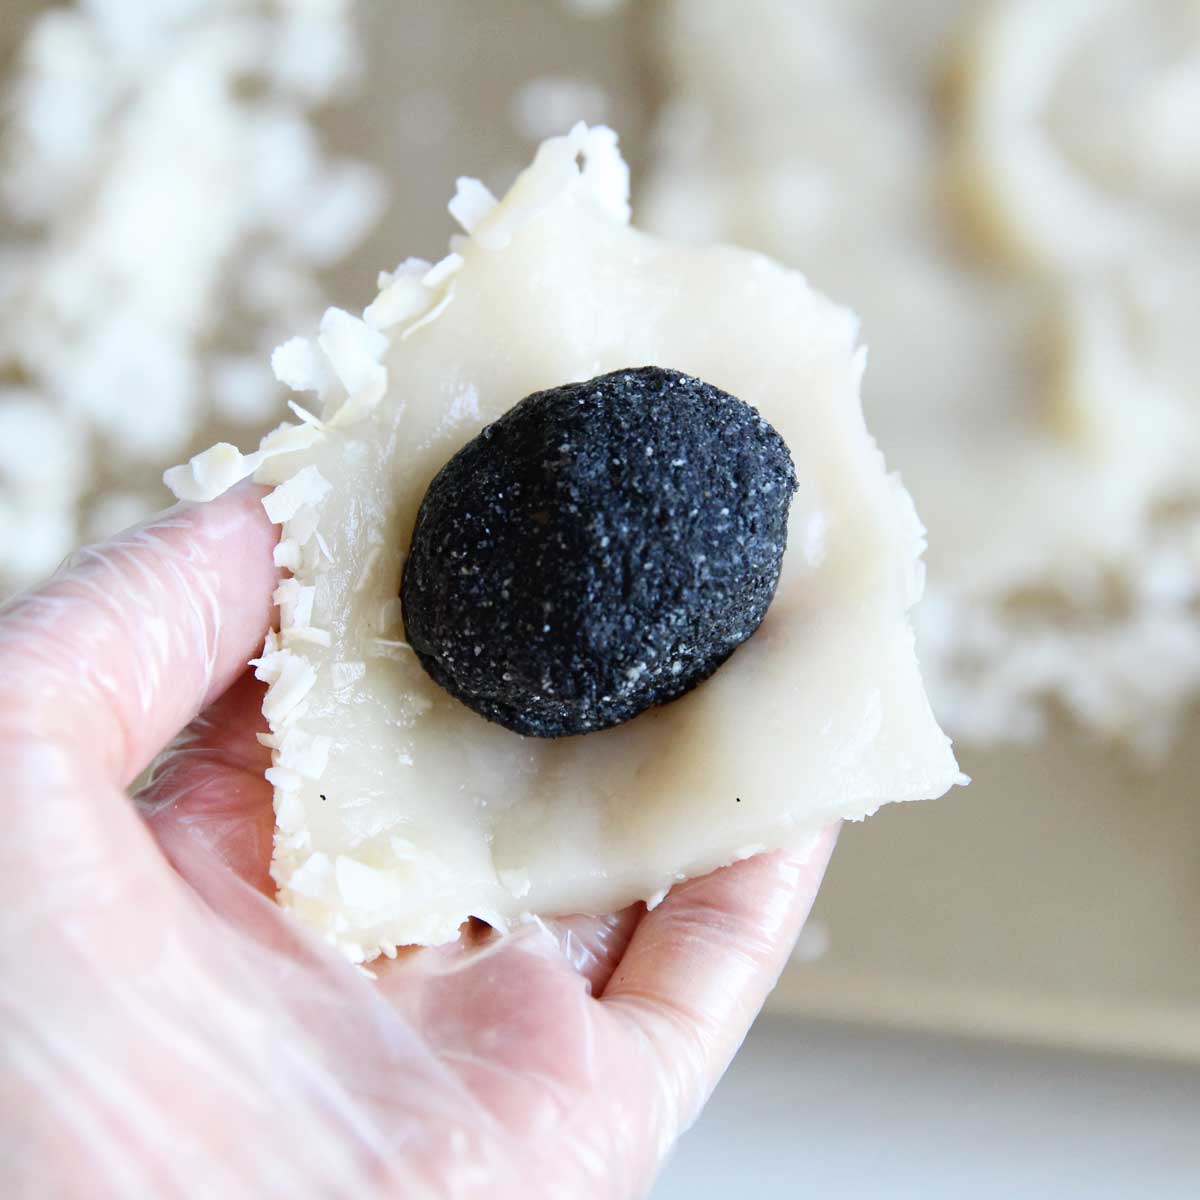 Easy Microwave Coconut Mochi with Black Sesame Filling - Microwave Coconut Mochi